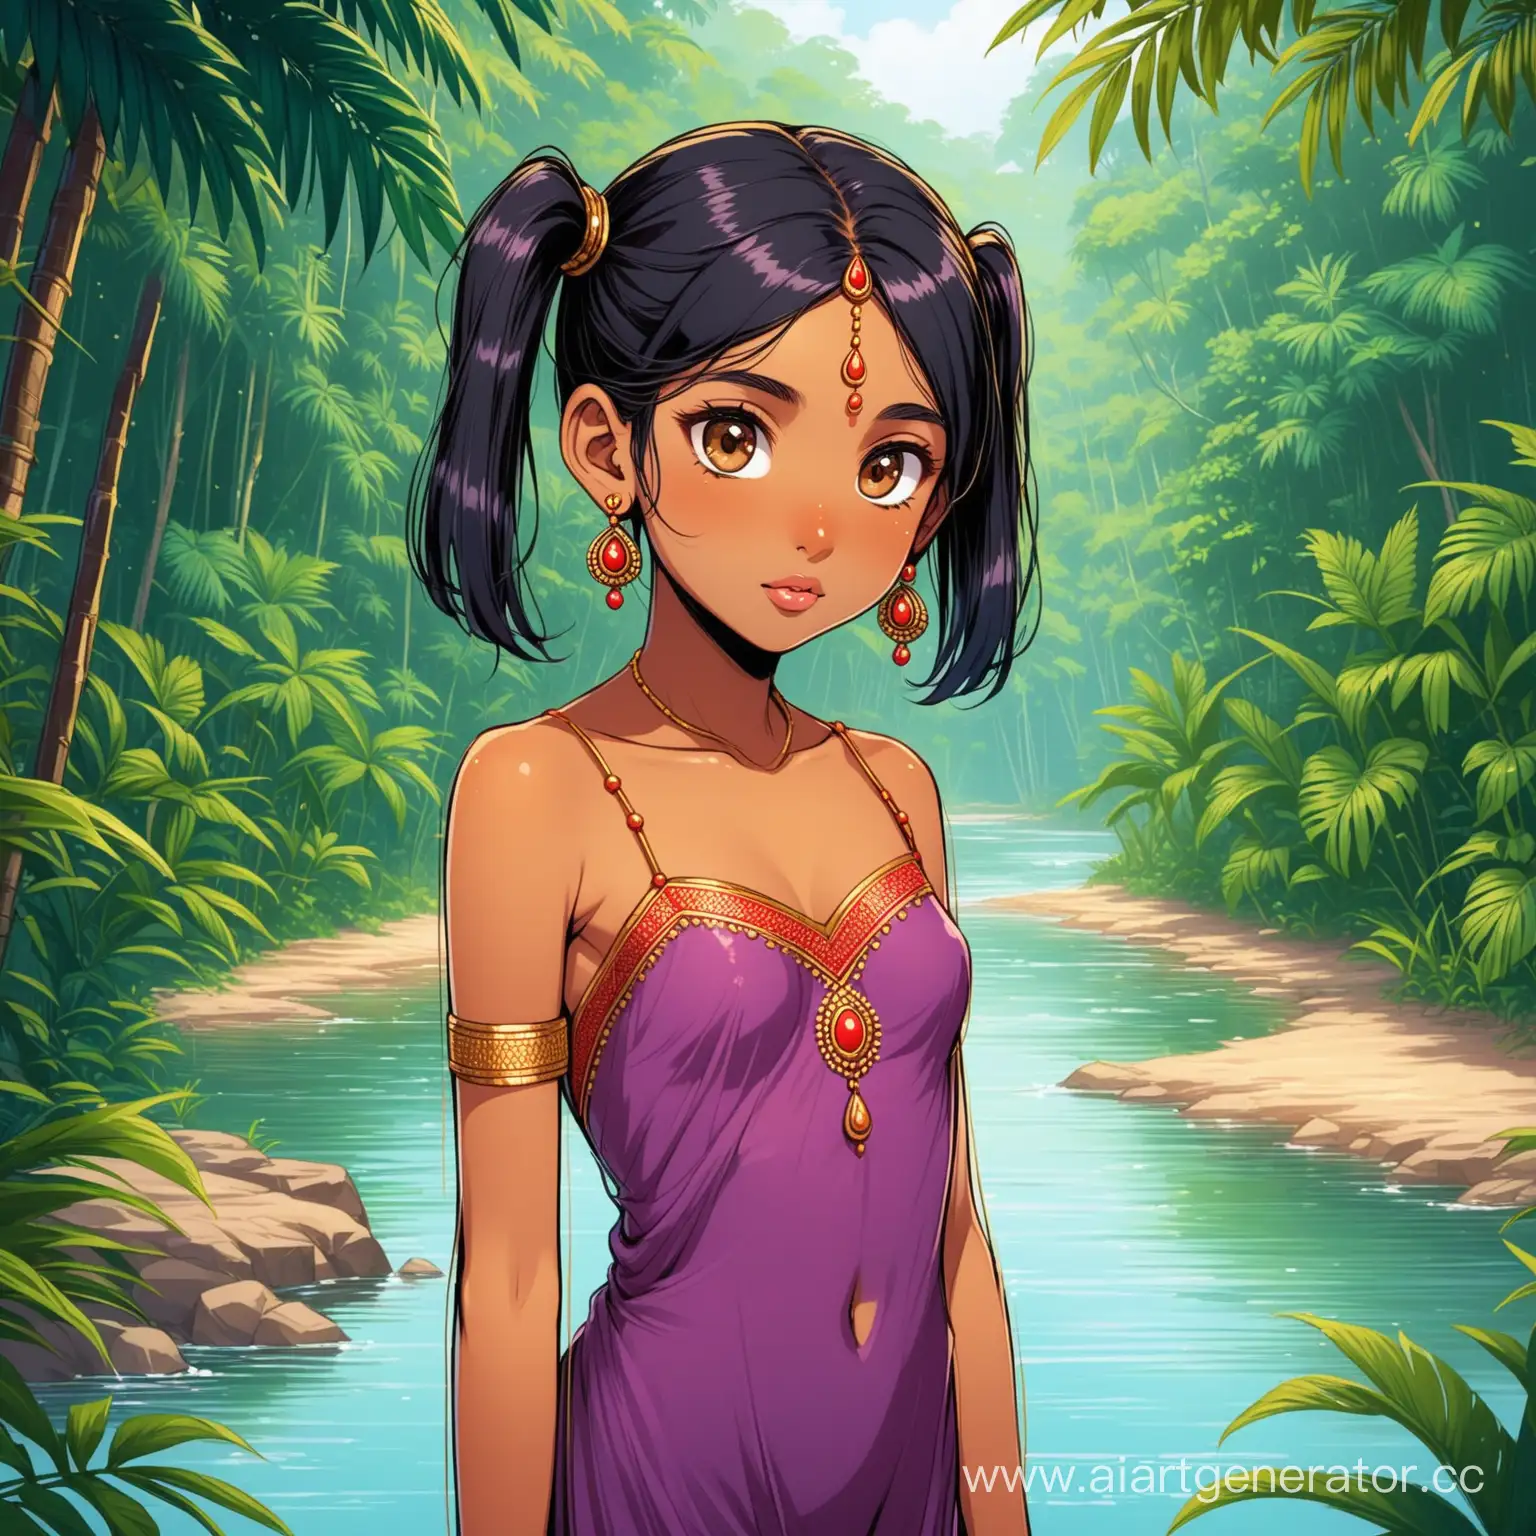 Girl, Tanned skin, brown eyes, big eyes, lush lips, skinny body, small breasts, black hair, two pigtails, big nose, Straight hair, A red dot on the forehead, a Hindu girl. Gold earrings, purple dress without sleeves and straps, no shoes. Indian jungle, by the river